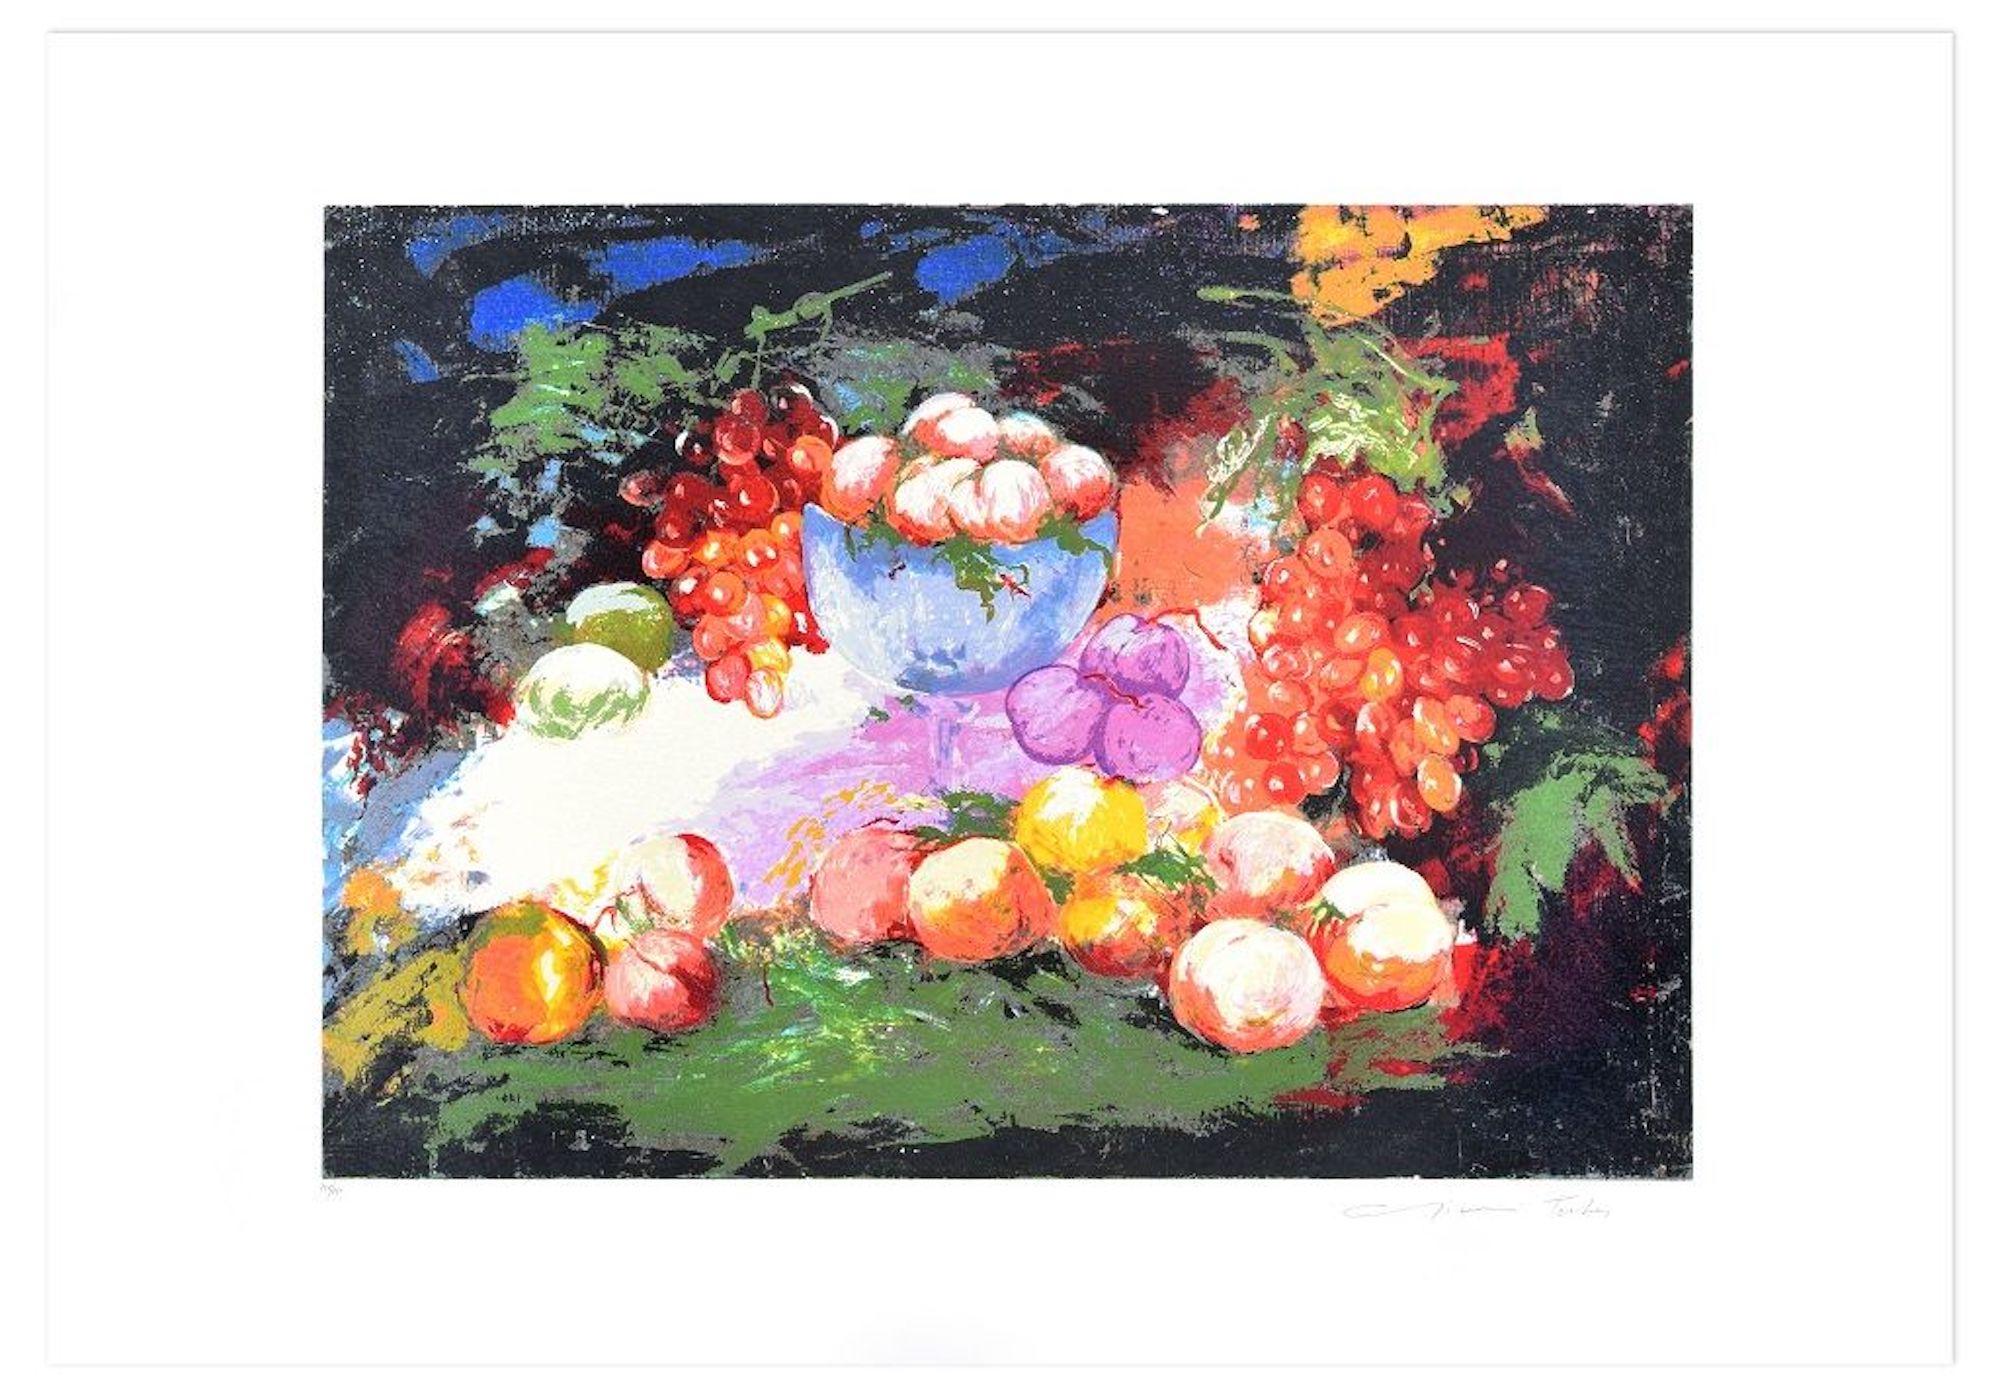 Still Life is an original print realized by the Italian artist Gianni Testa (1936) in 1986.

Original mixed colored serigraph. 

Hand-signed by the artist on lower right. Numbered on lower left. Edition 121/150

Very good conditions.

This beautiful